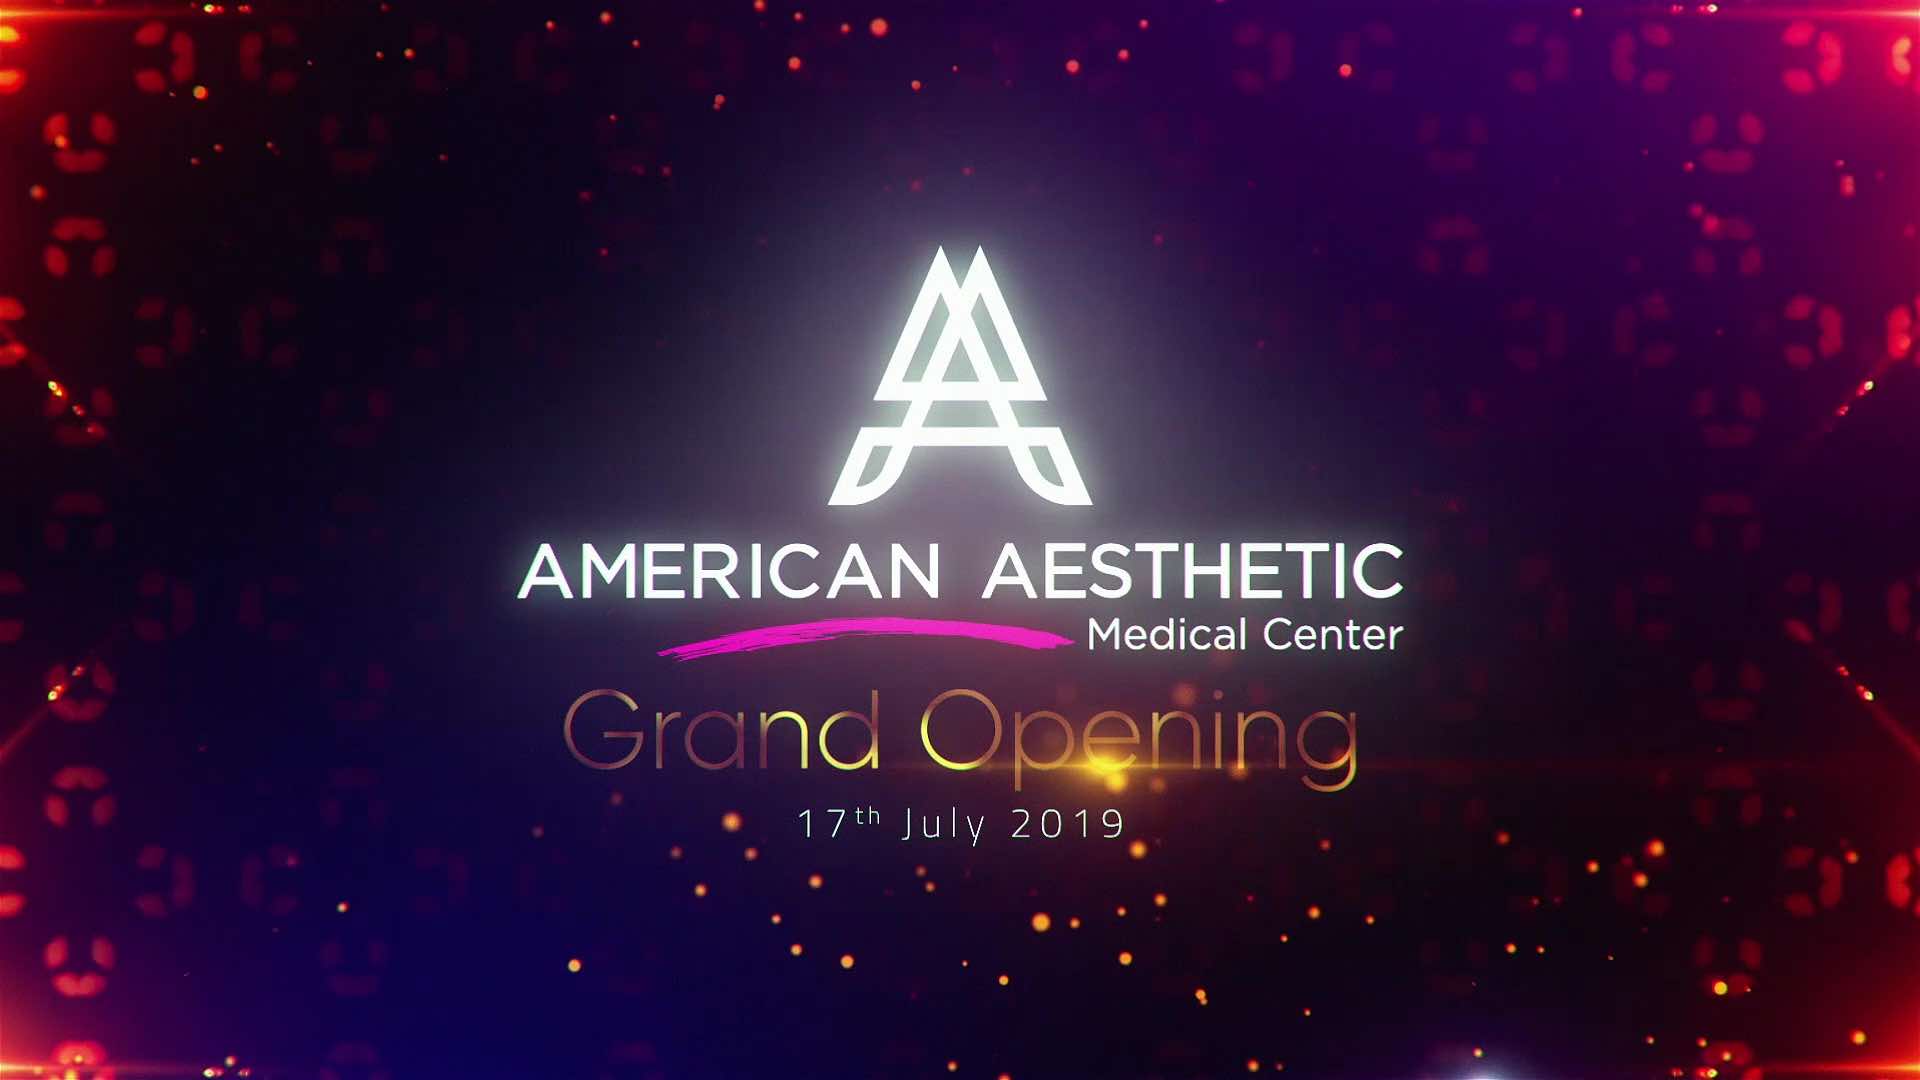 American Aesthetic Medical Center Inauguration